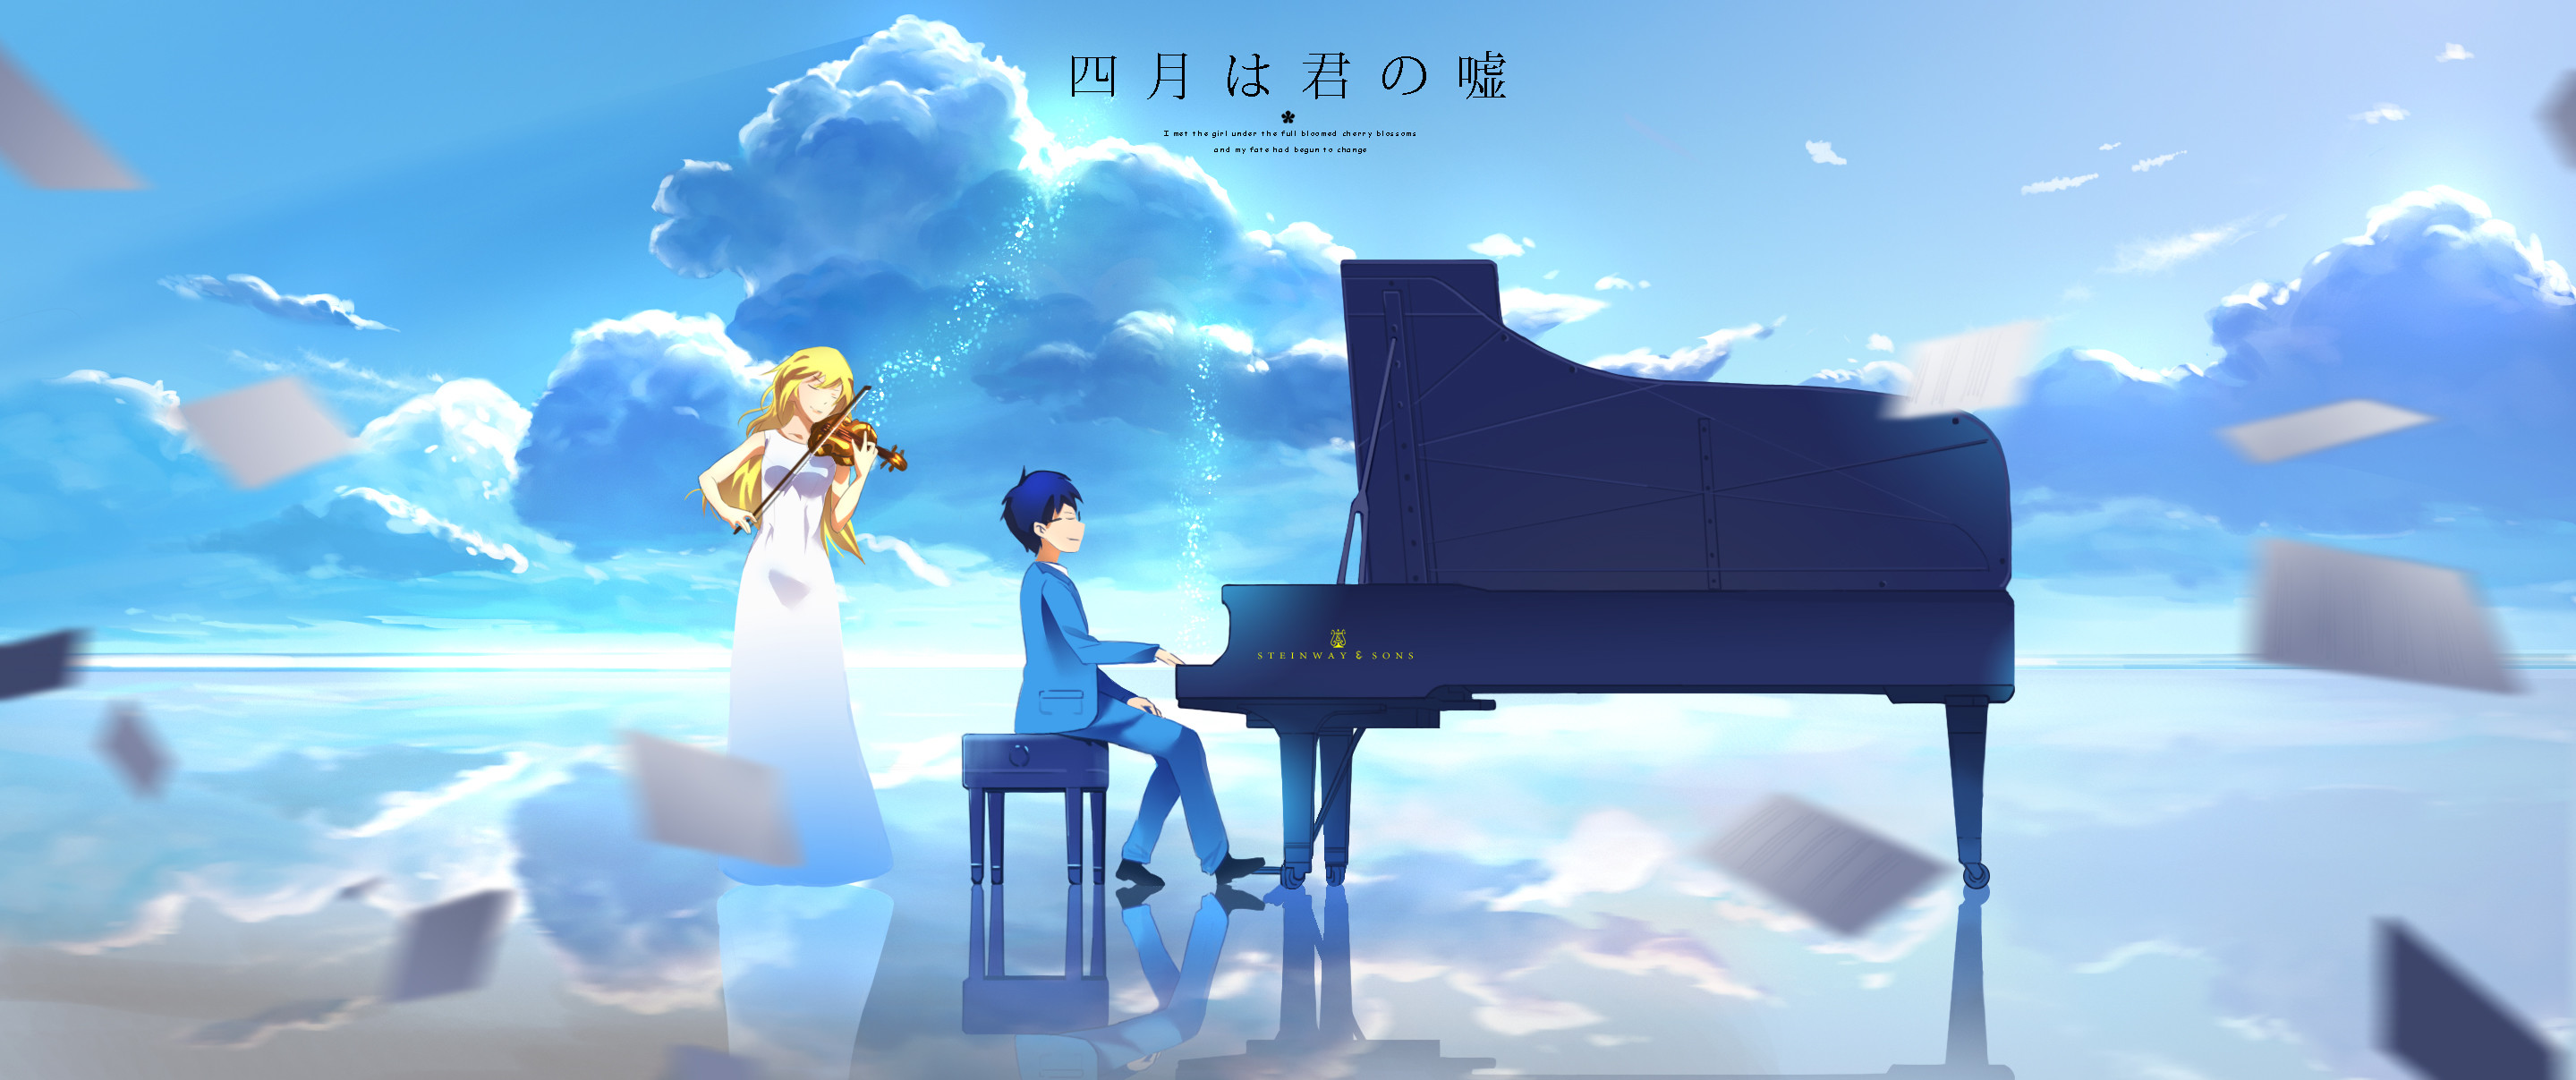 2879x1207 129 Your Lie in April HD Wallpapers | Backgrounds - Wallpaper Abyss - Page 3